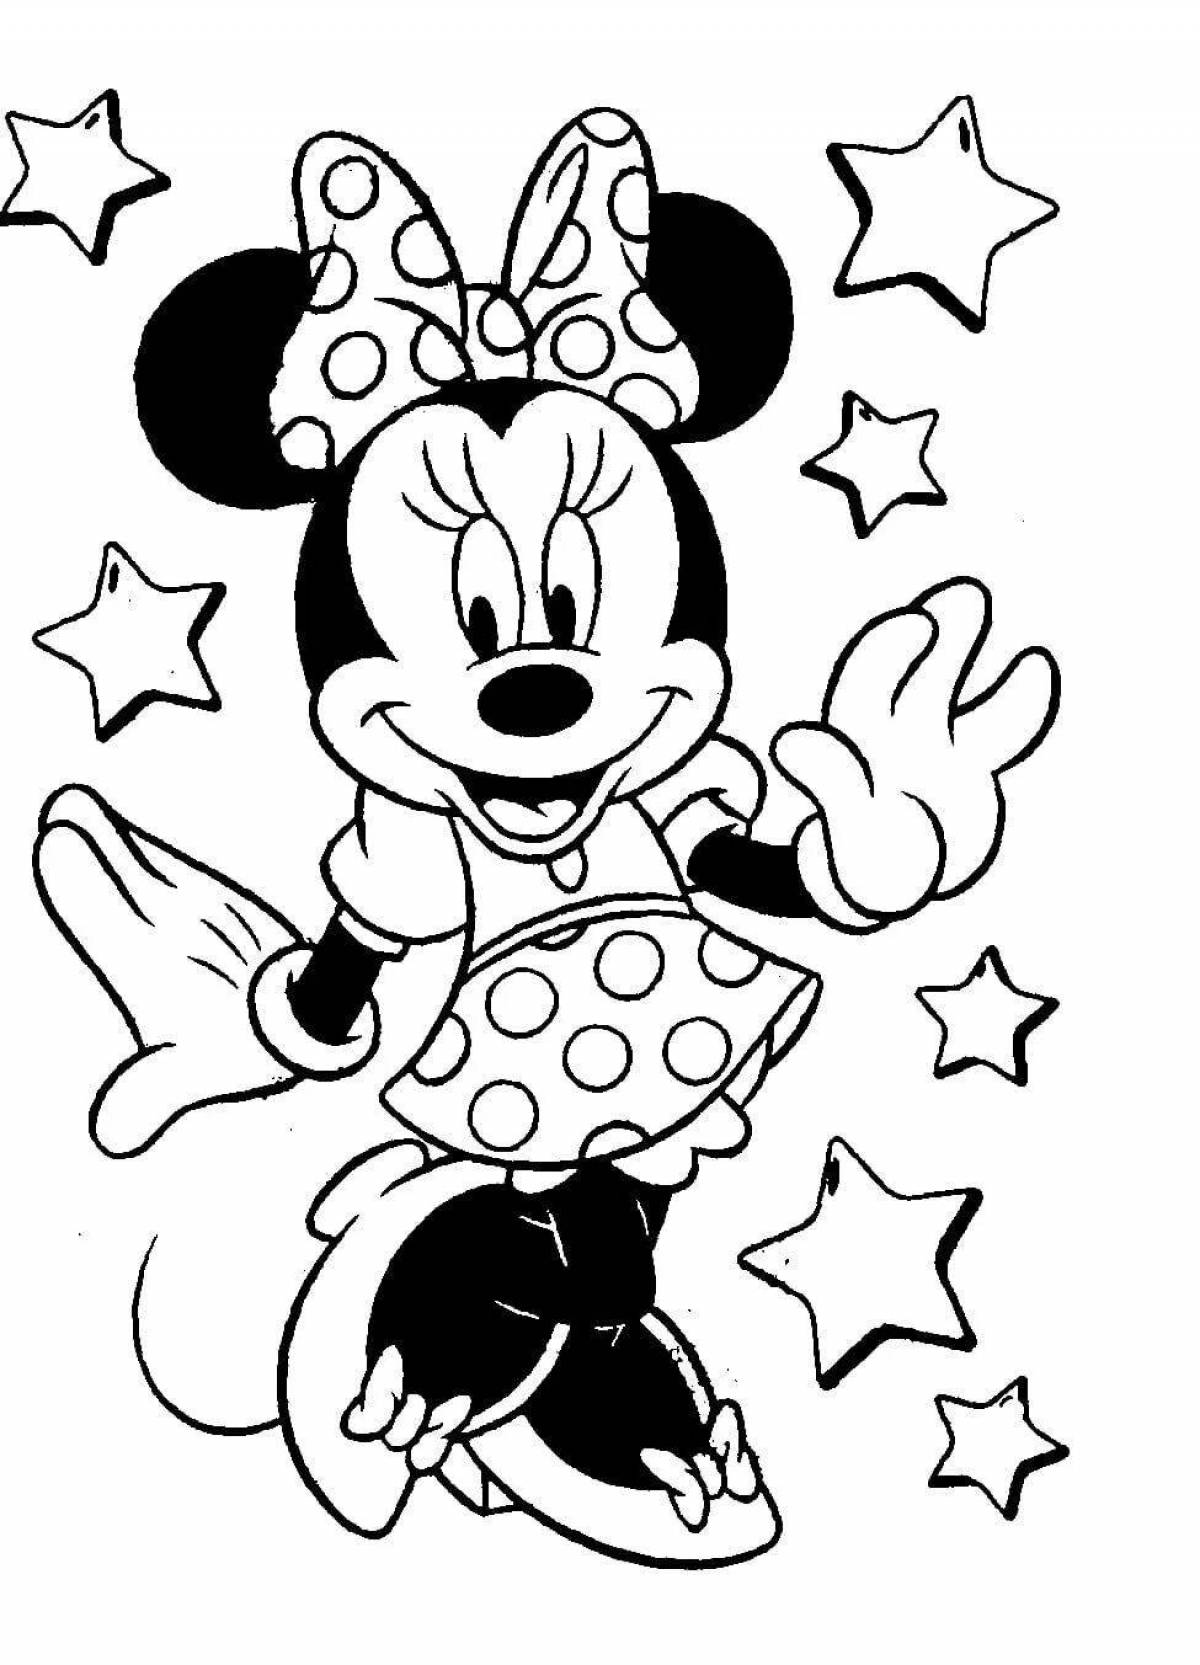 Children's mickey mouse coloring book